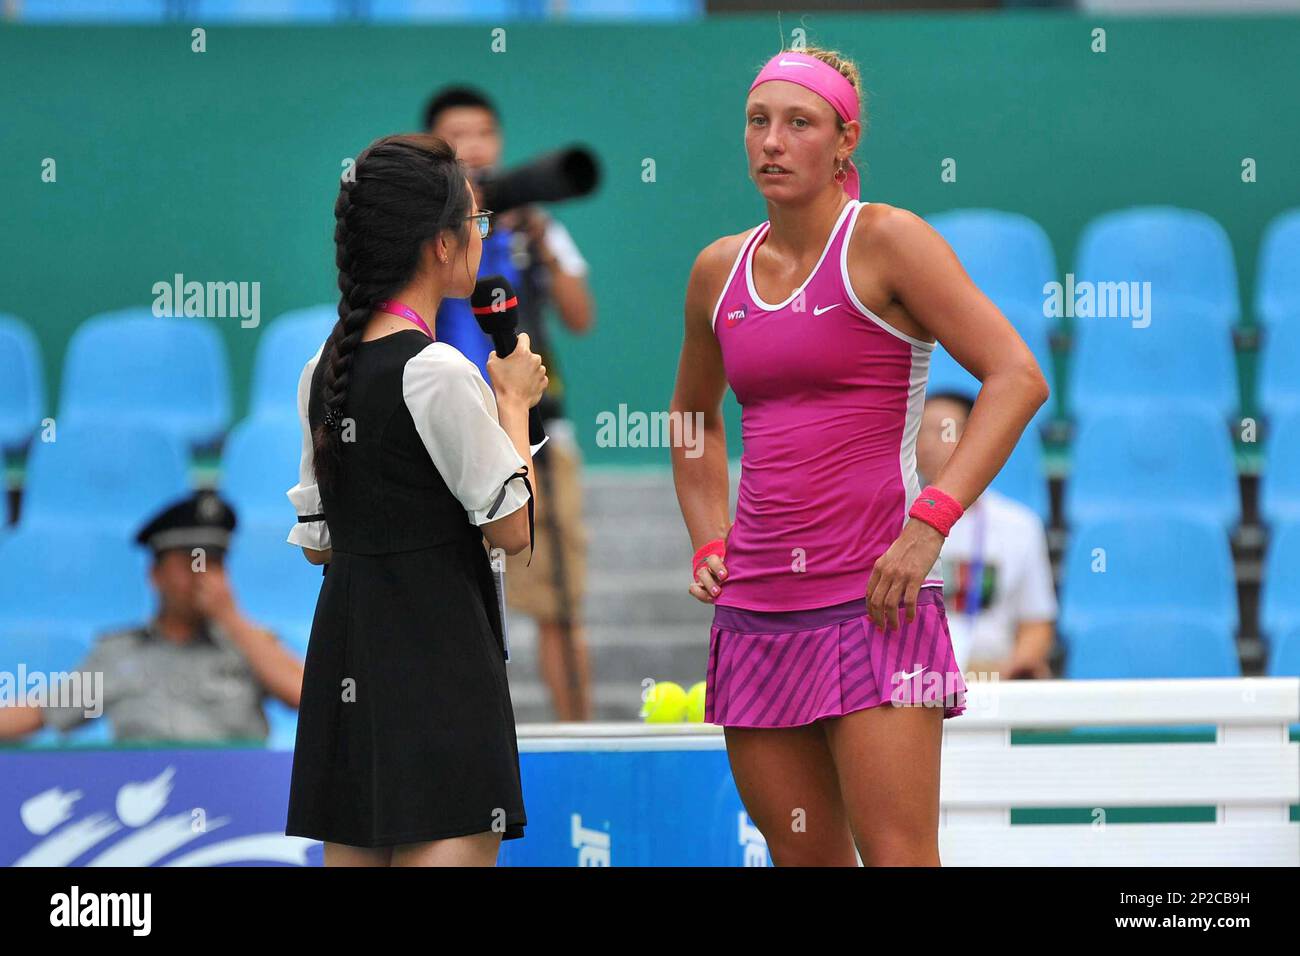 Yanina Wickmayer of Belgium, right, is interviewed after defeating Monica  Niculescu of Romania in their quarterfinal match of the women's singles  during the 2015 WTA Guangzhou Open tennis tournament in Guangzhou city,